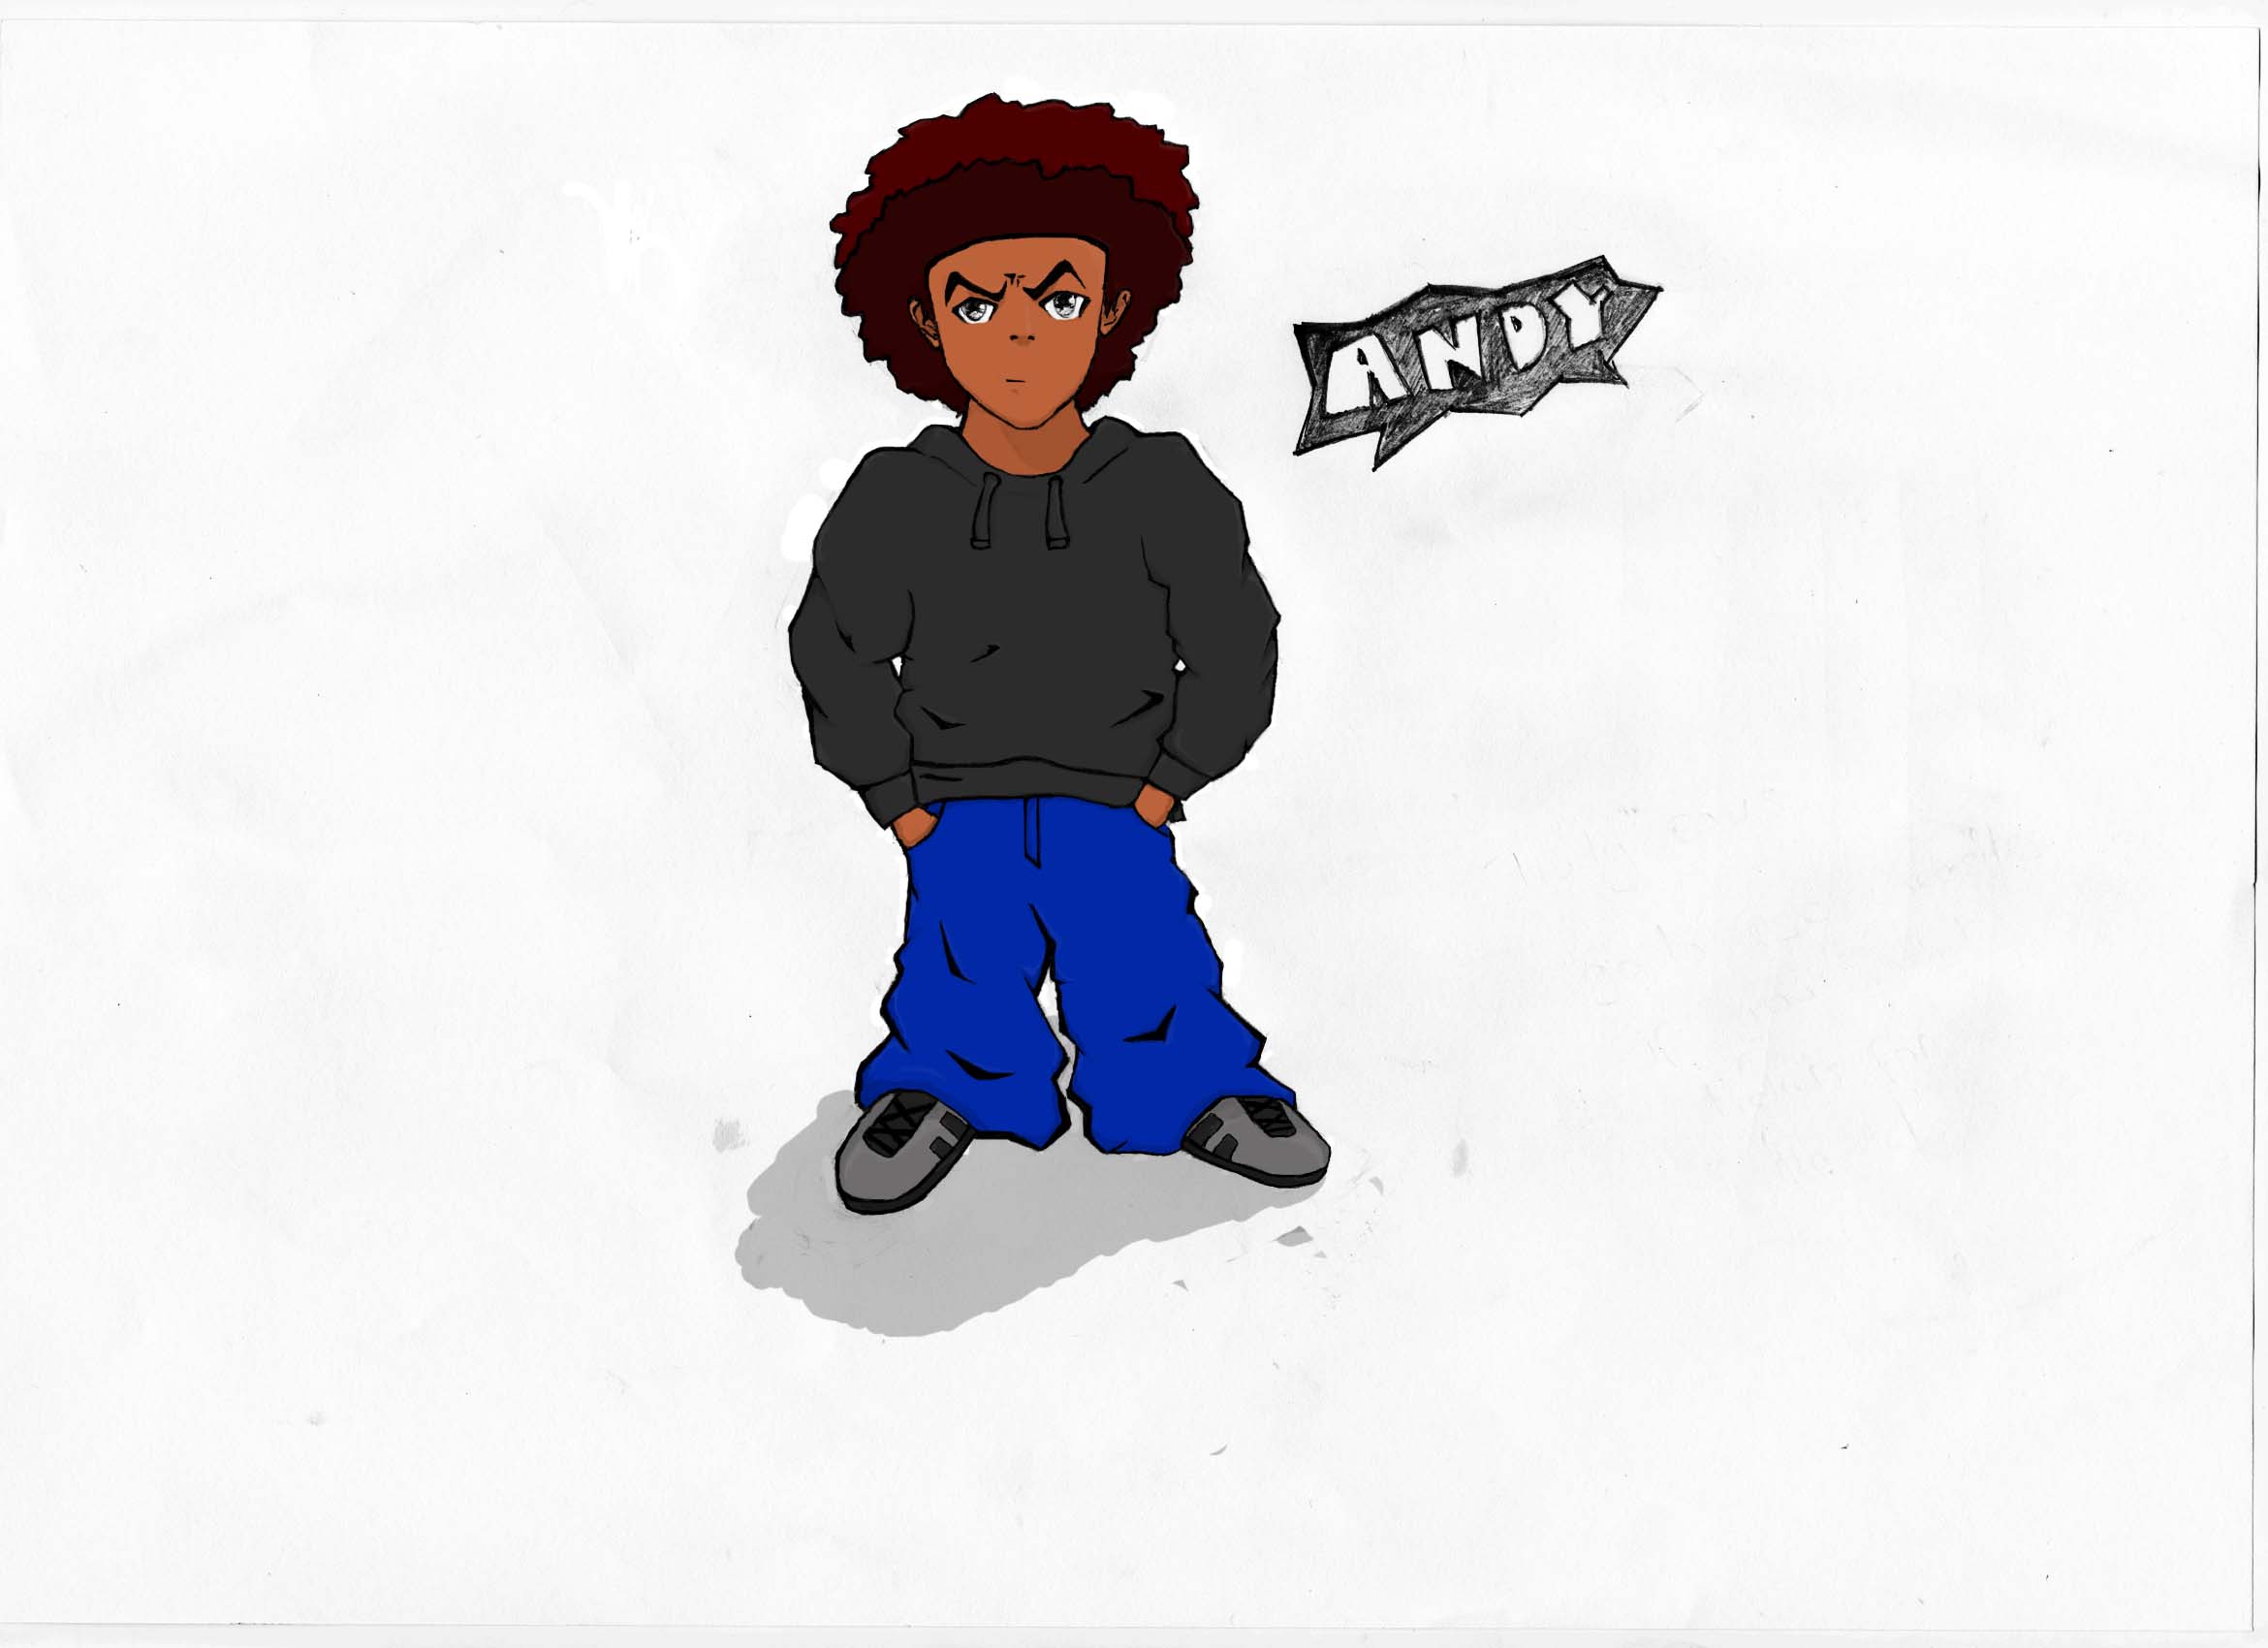 A boondocks style drawing by Axylex on deviantART